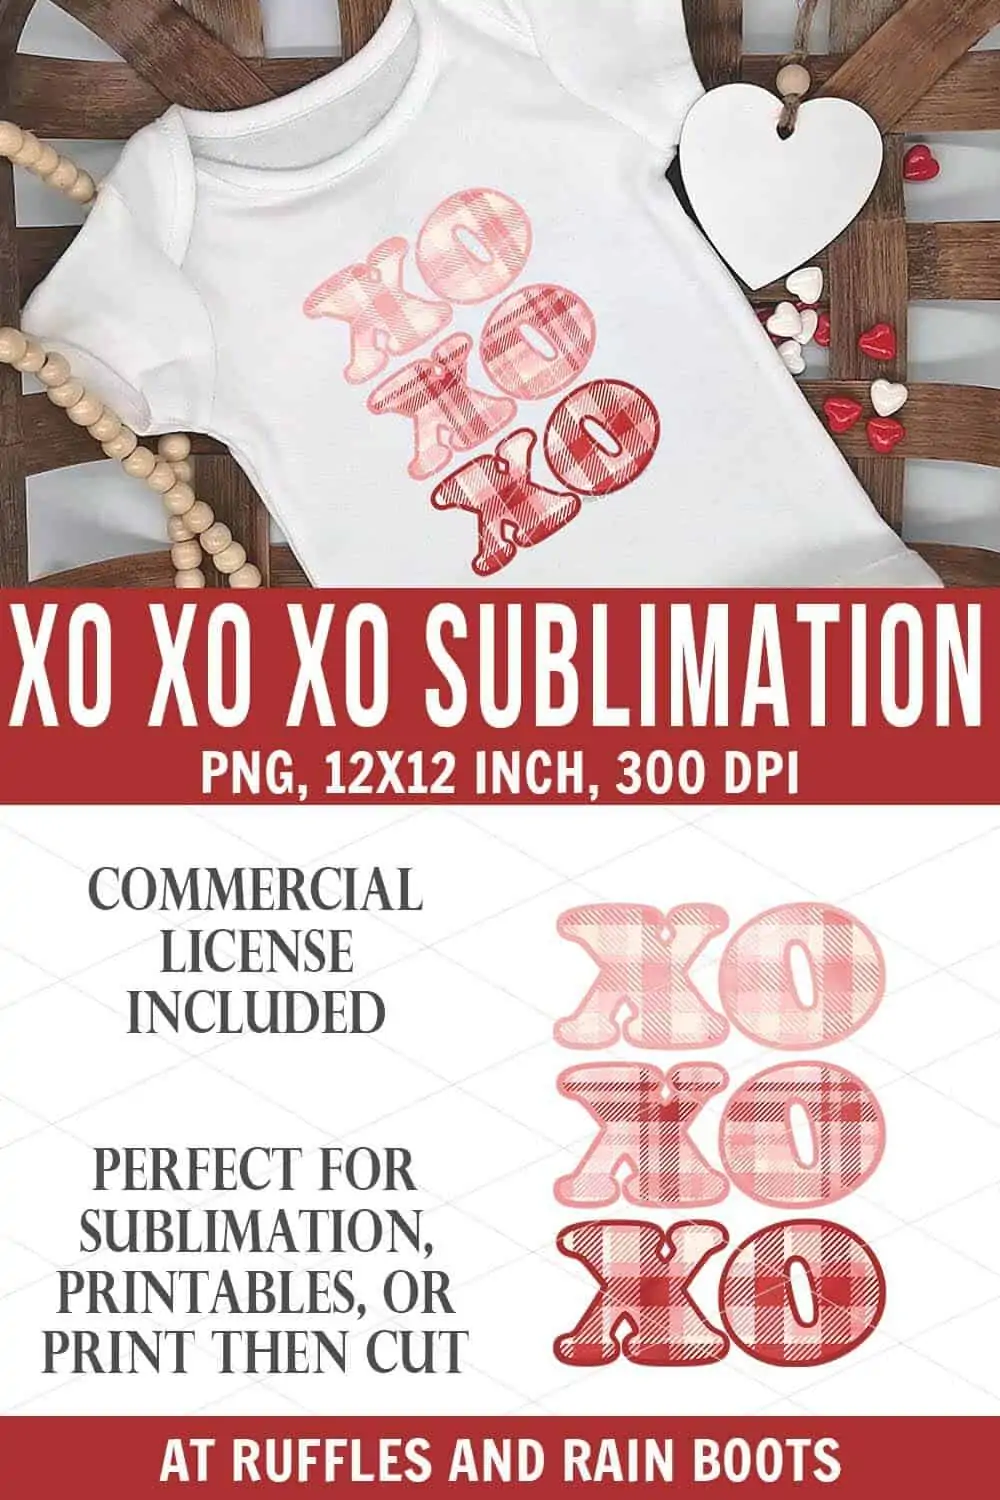 stacked vertical image of baby body suit with plaid XO sublimation print with text which reads xo xo xo sublimation png 12x12 300 dpi